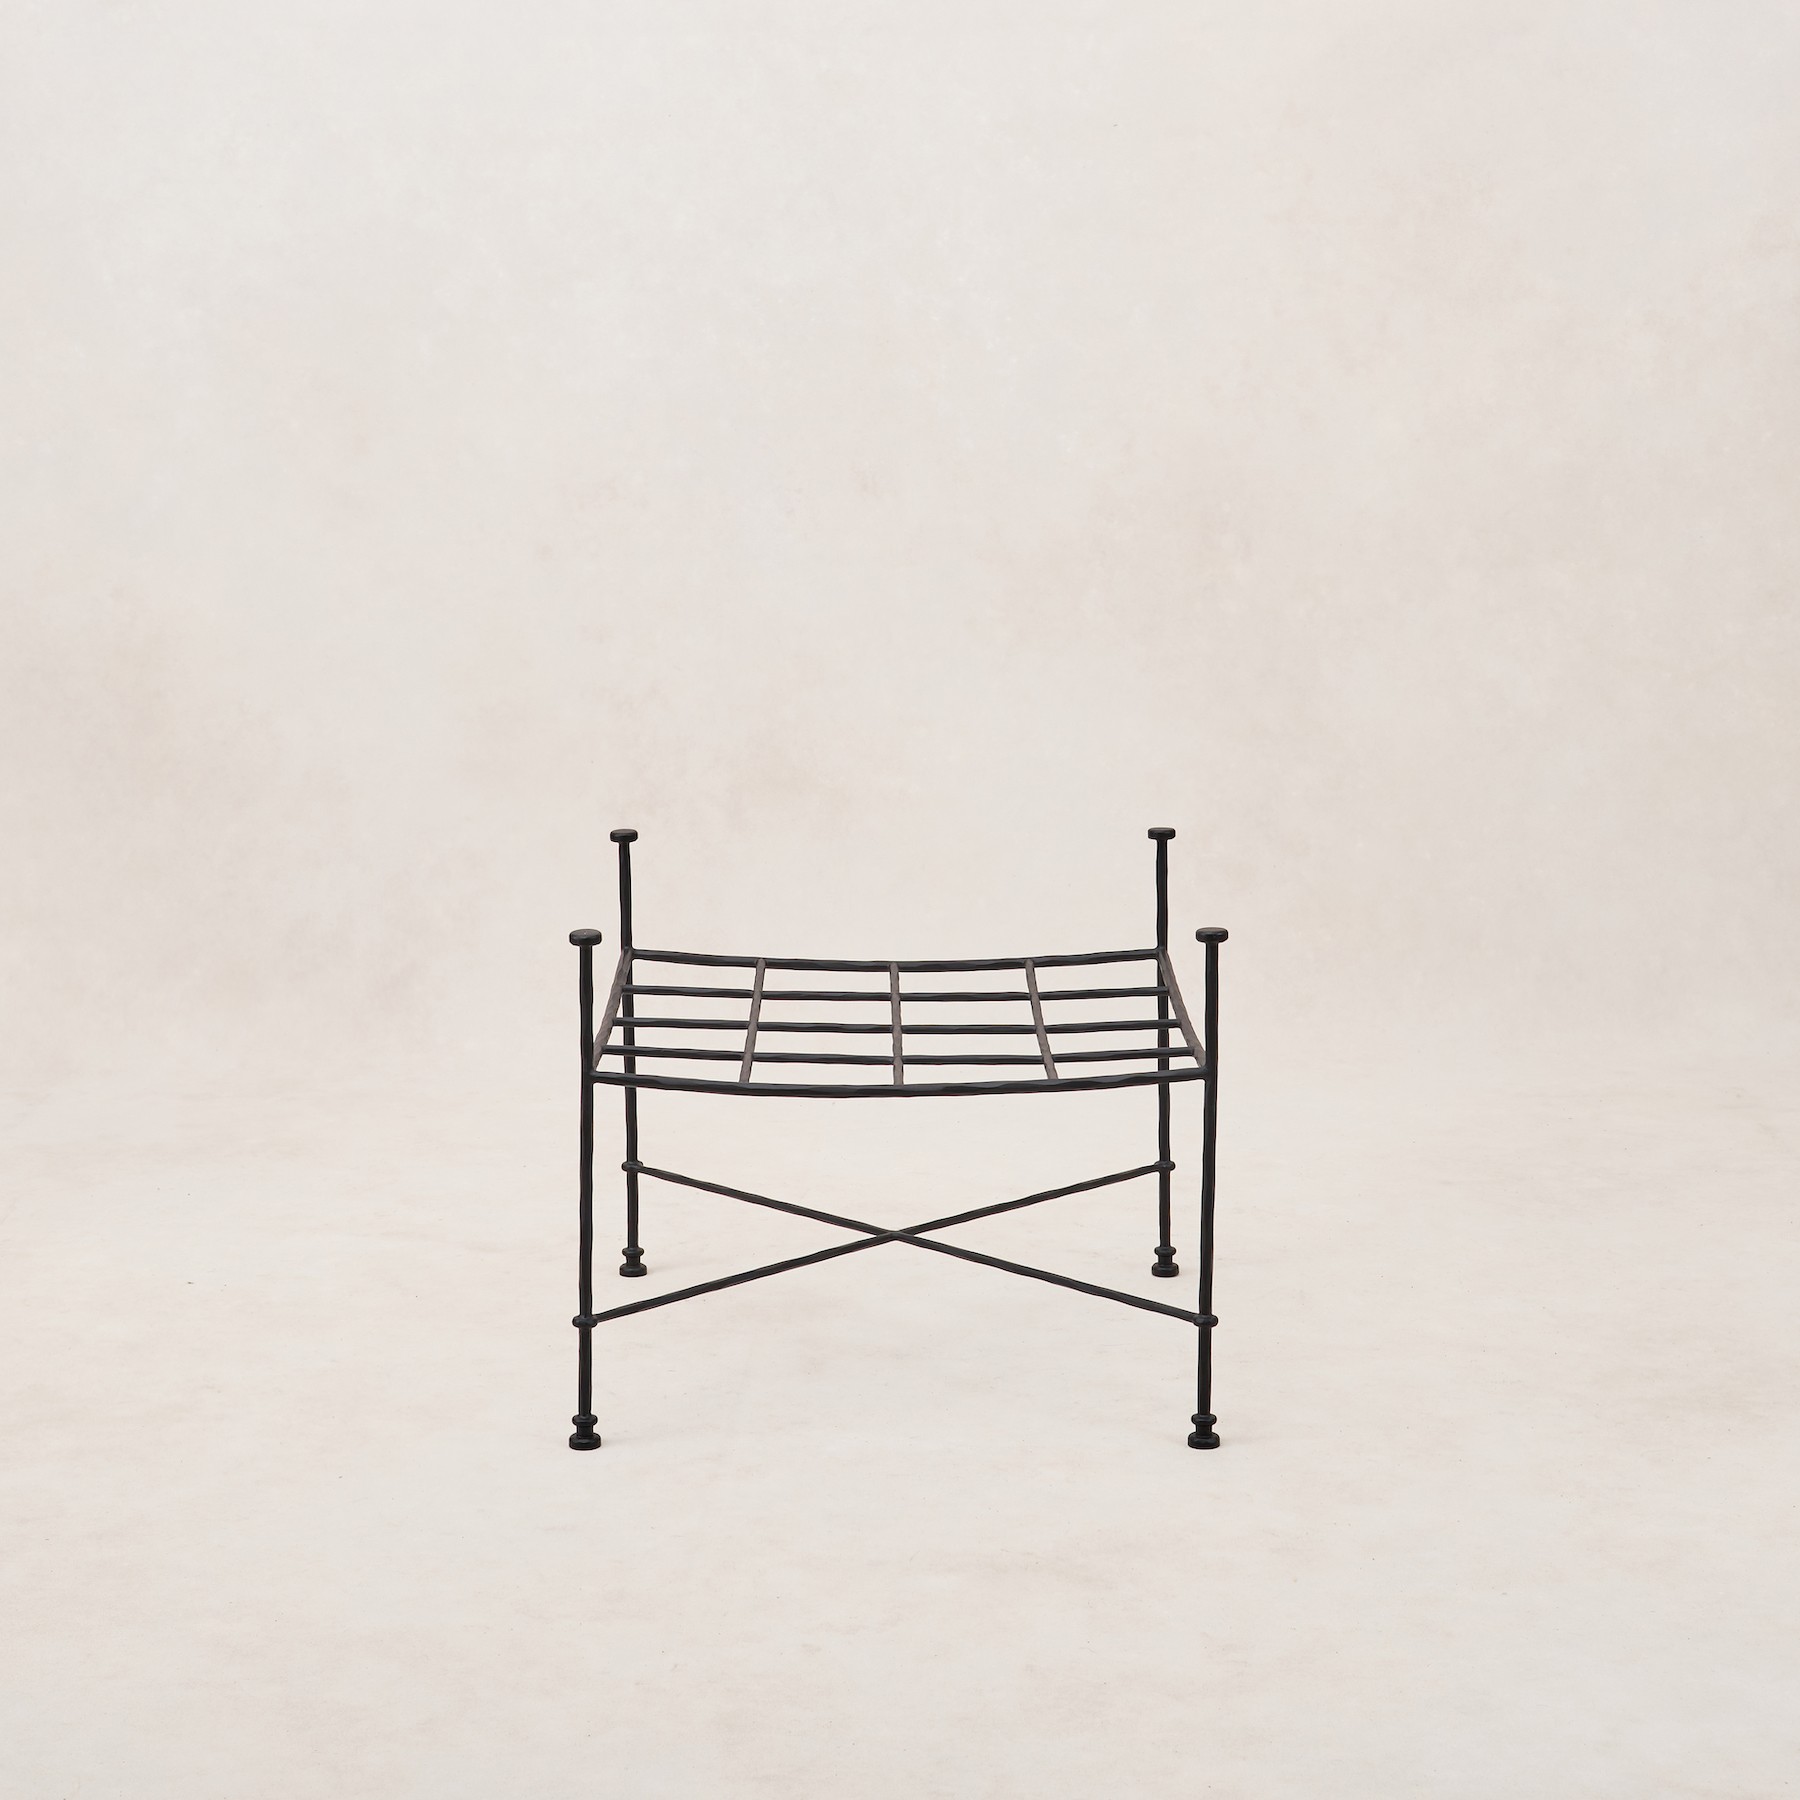 a black iron bed frame with a white background